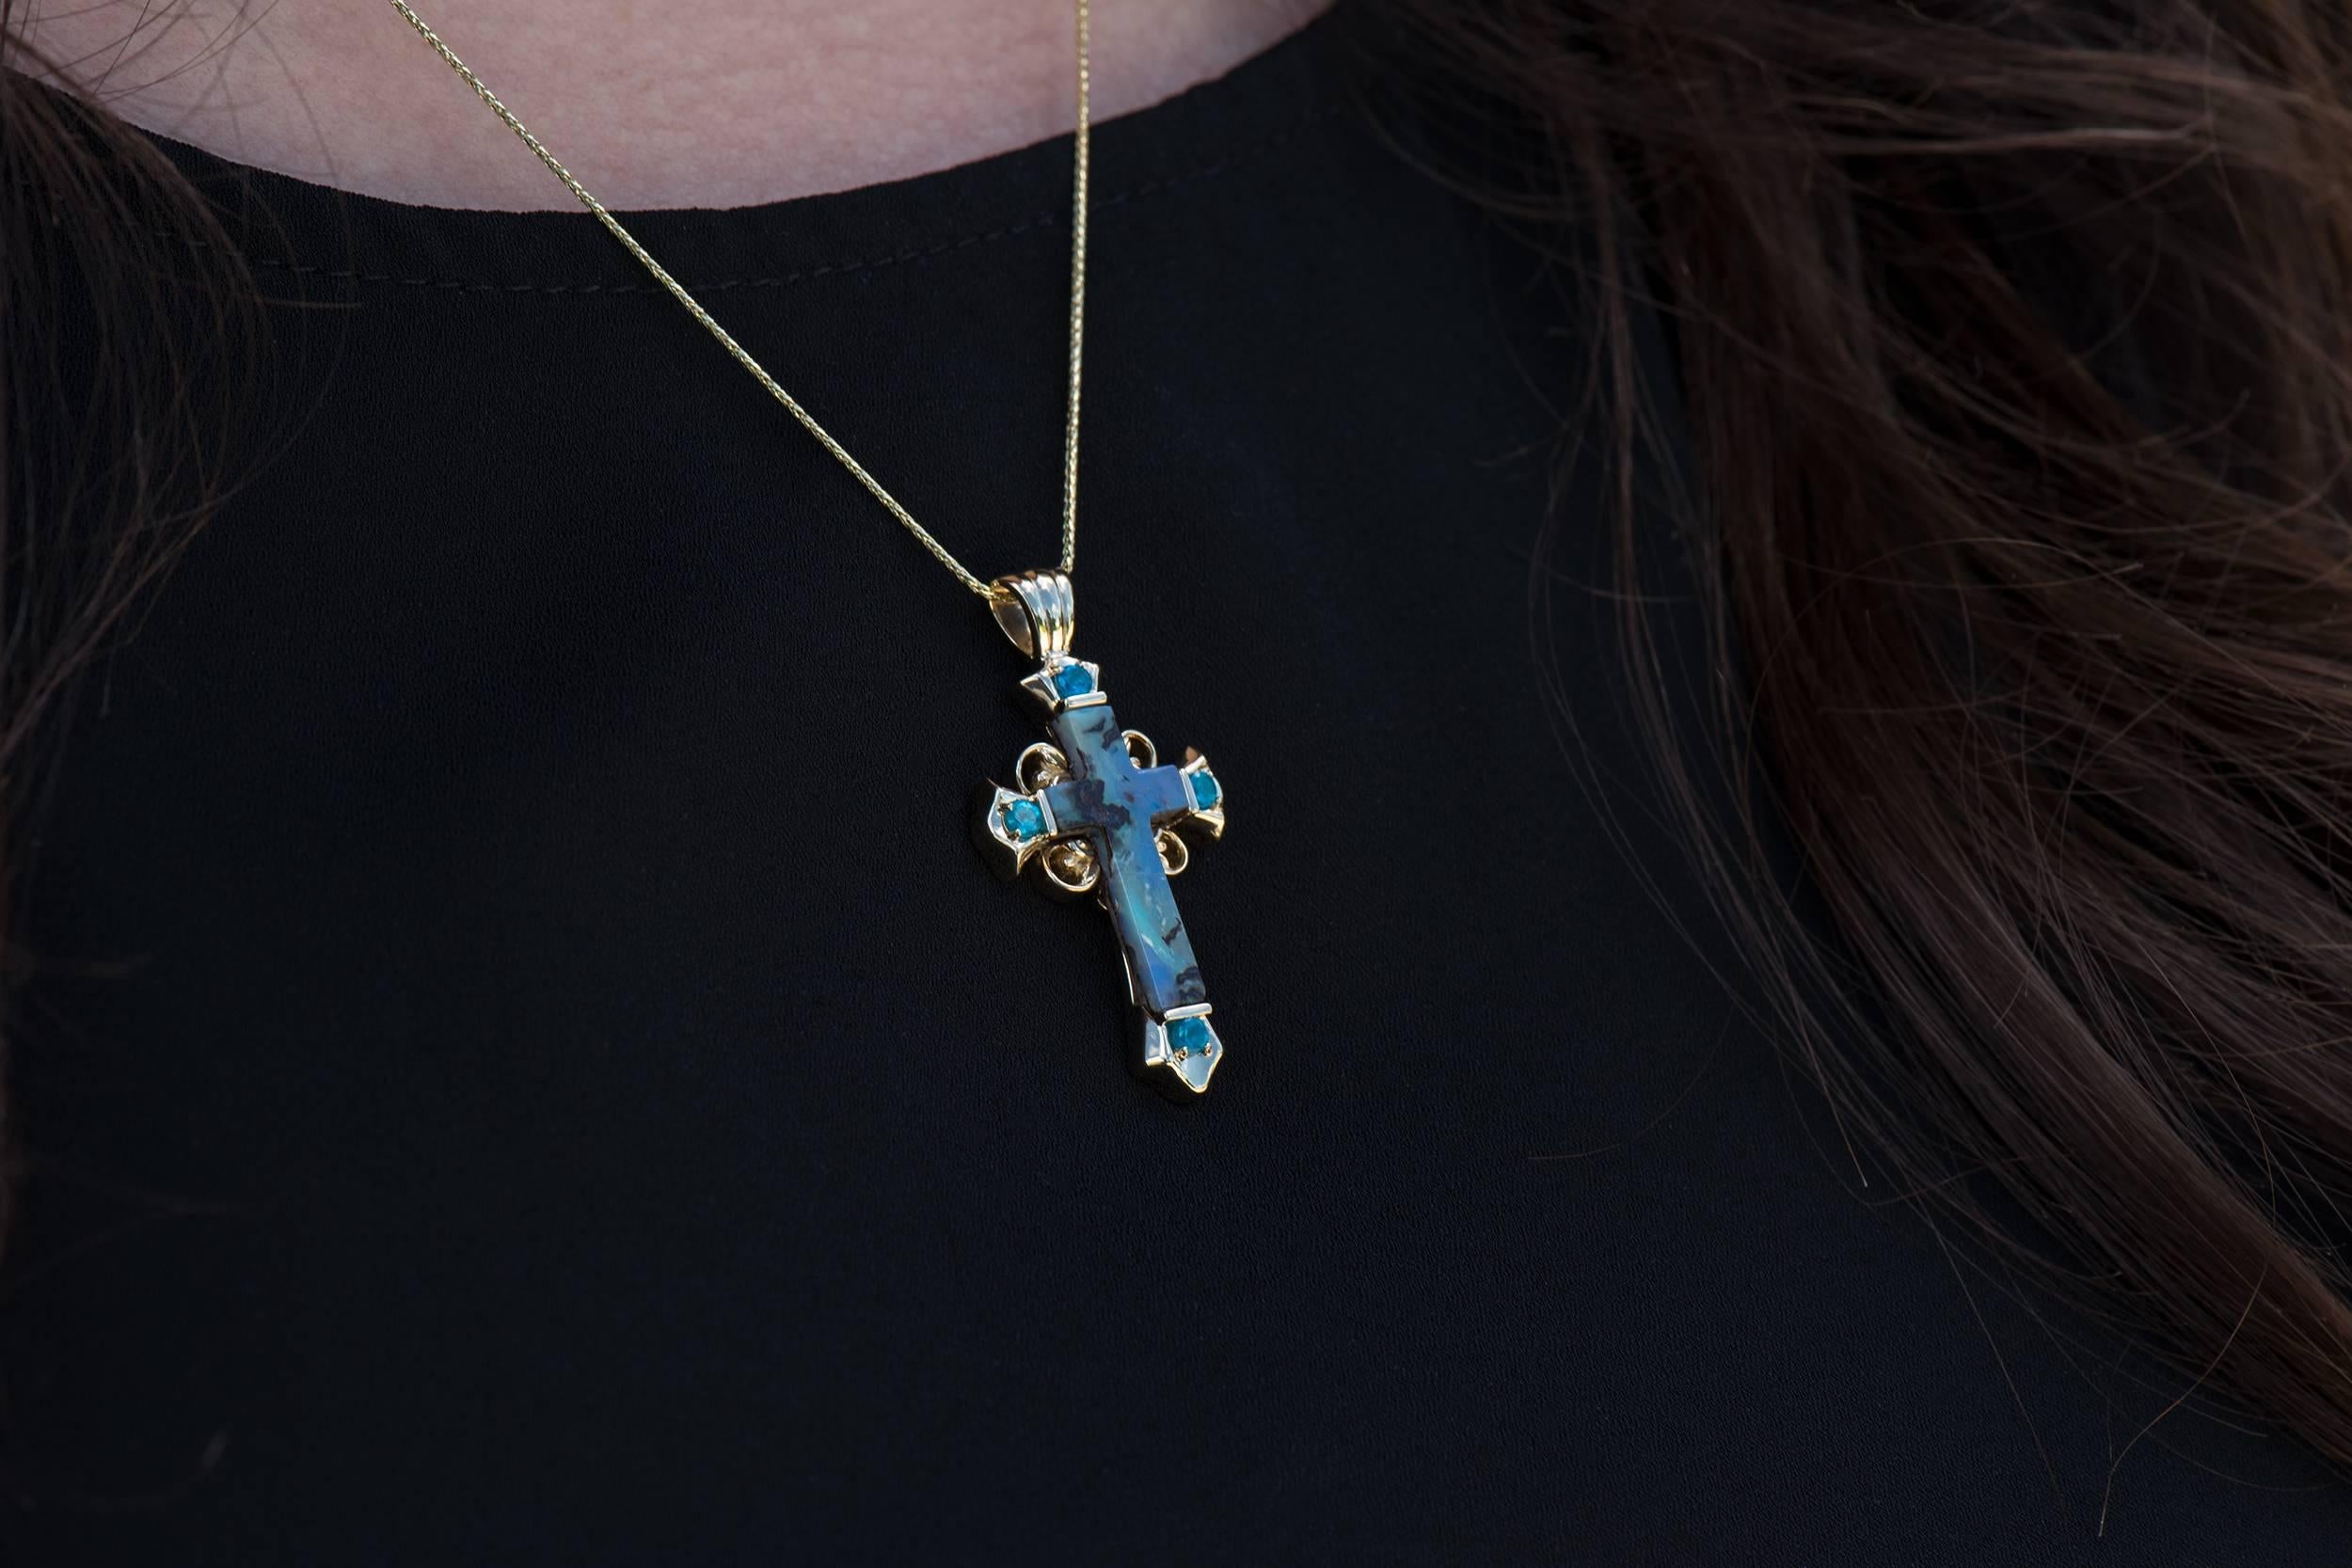 This pendant is a Dianna Rae Original featuring a genuine Australian boulder opal.  The opal has amazing rivers of blue, green and brown flowing through it.  The accents gems are genuine apatite with an intense blue color.  The cross is 14K yellow